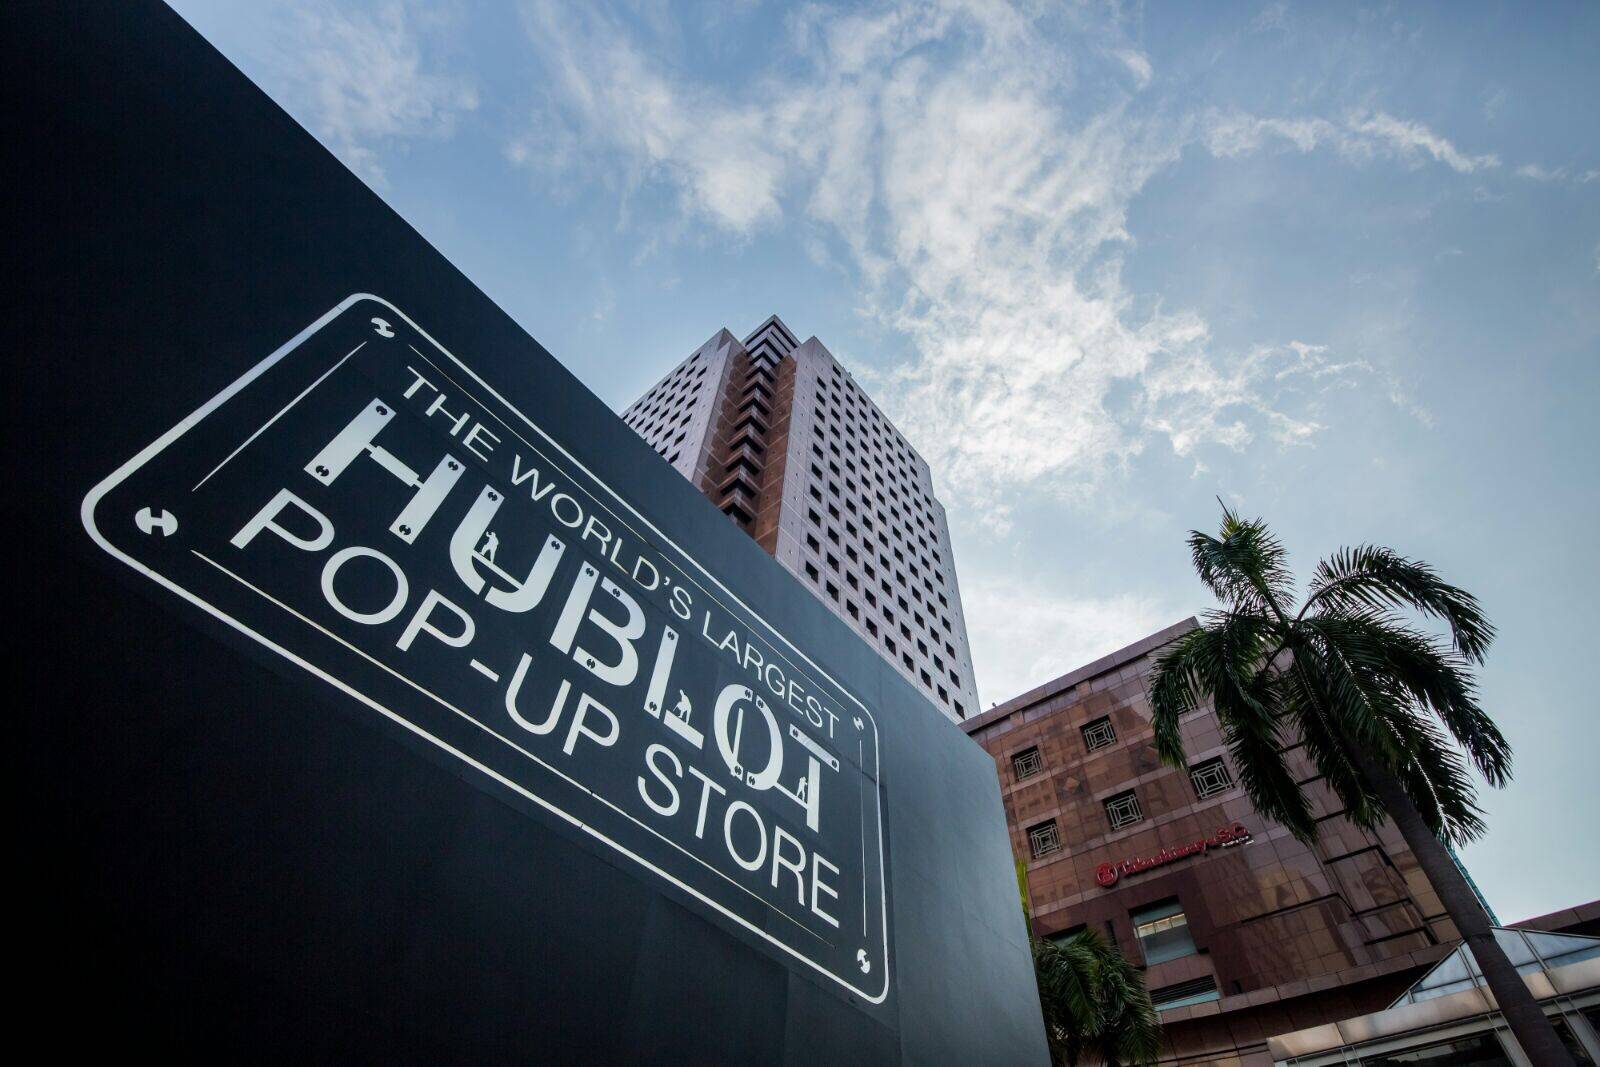 1. Hublot Stages up its Largest Pop-Up Store from 16 - 26 August 2015 at Ngee Ann City Civic Plaza